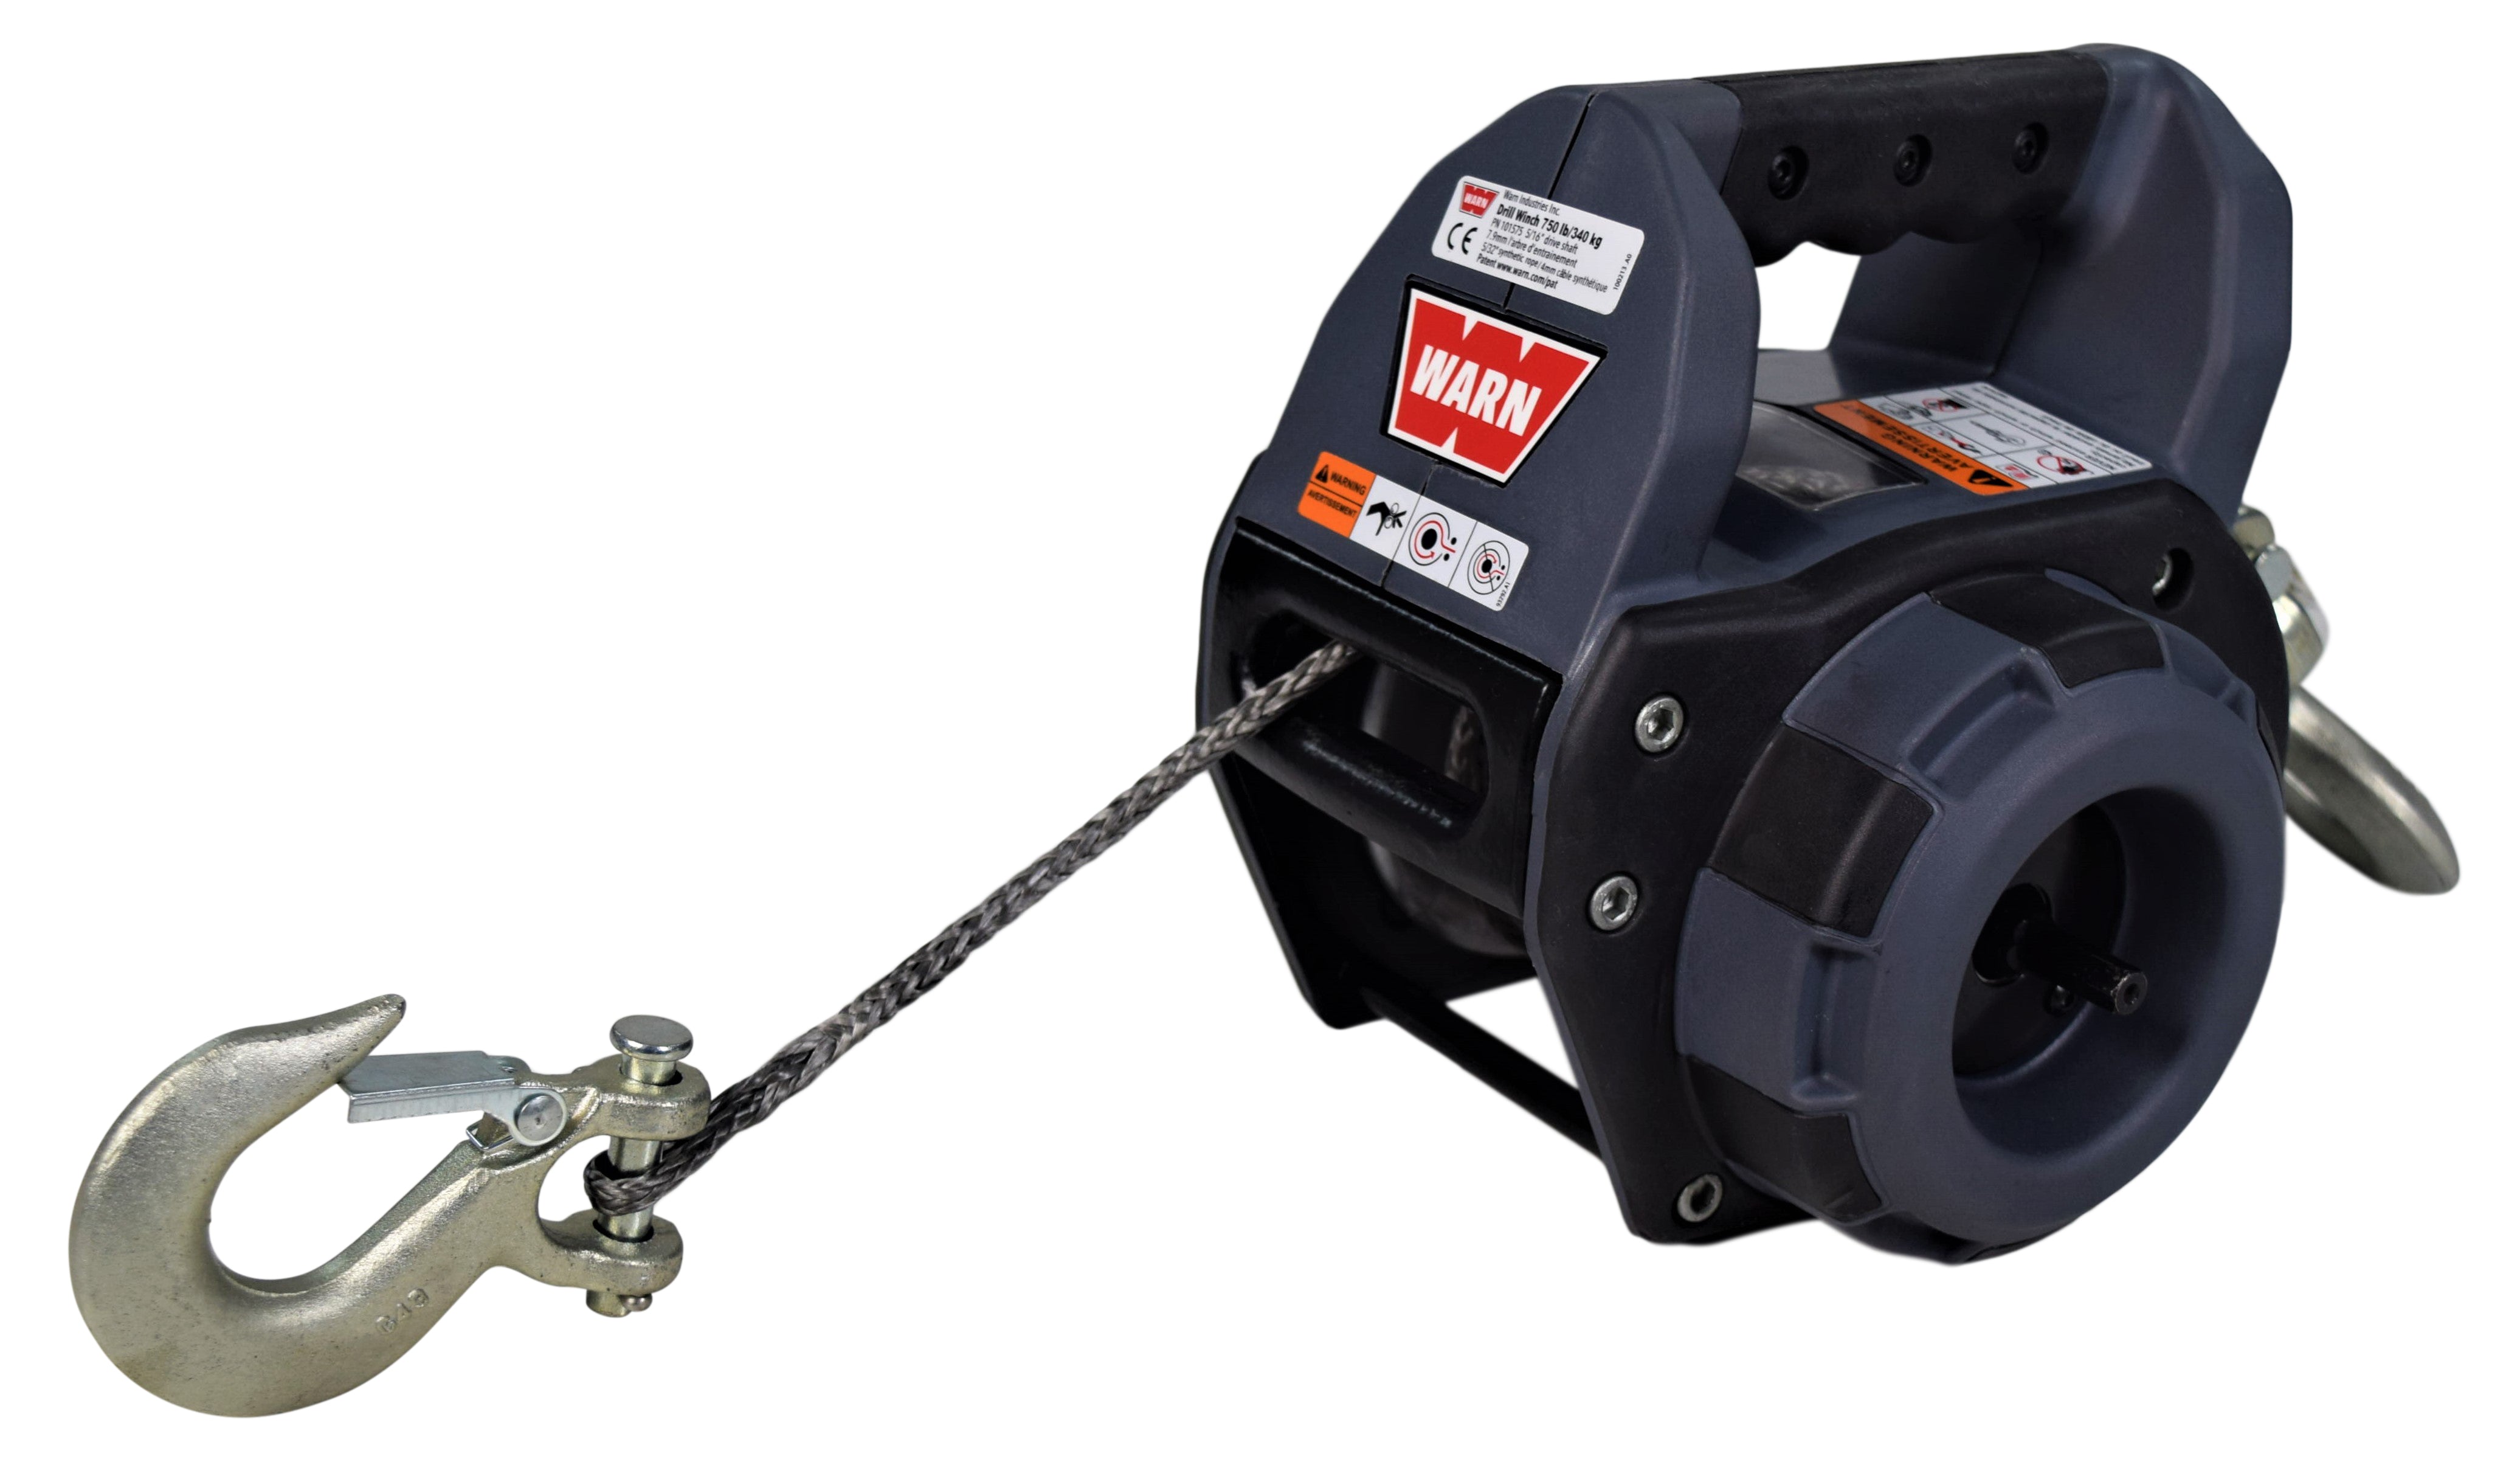 Warn-101570-Drill-Winch-750-lbs-Capacity-40-Synthetic-Rope-Free-spool-Clutch-image-7